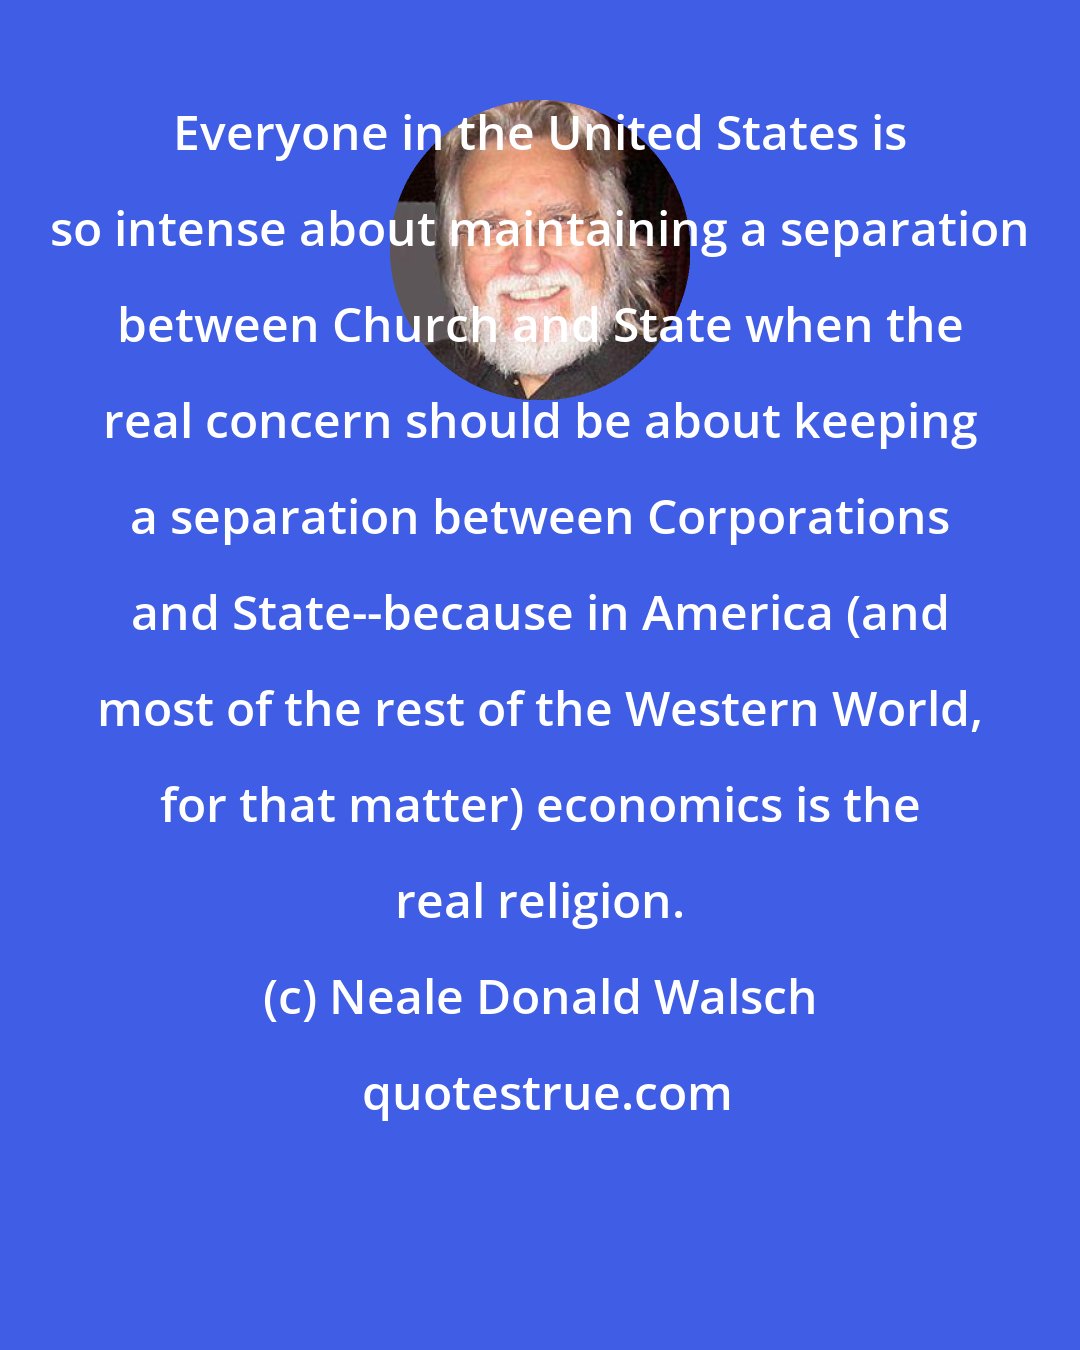 Neale Donald Walsch: Everyone in the United States is so intense about maintaining a separation between Church and State when the real concern should be about keeping a separation between Corporations and State--because in America (and most of the rest of the Western World, for that matter) economics is the real religion.